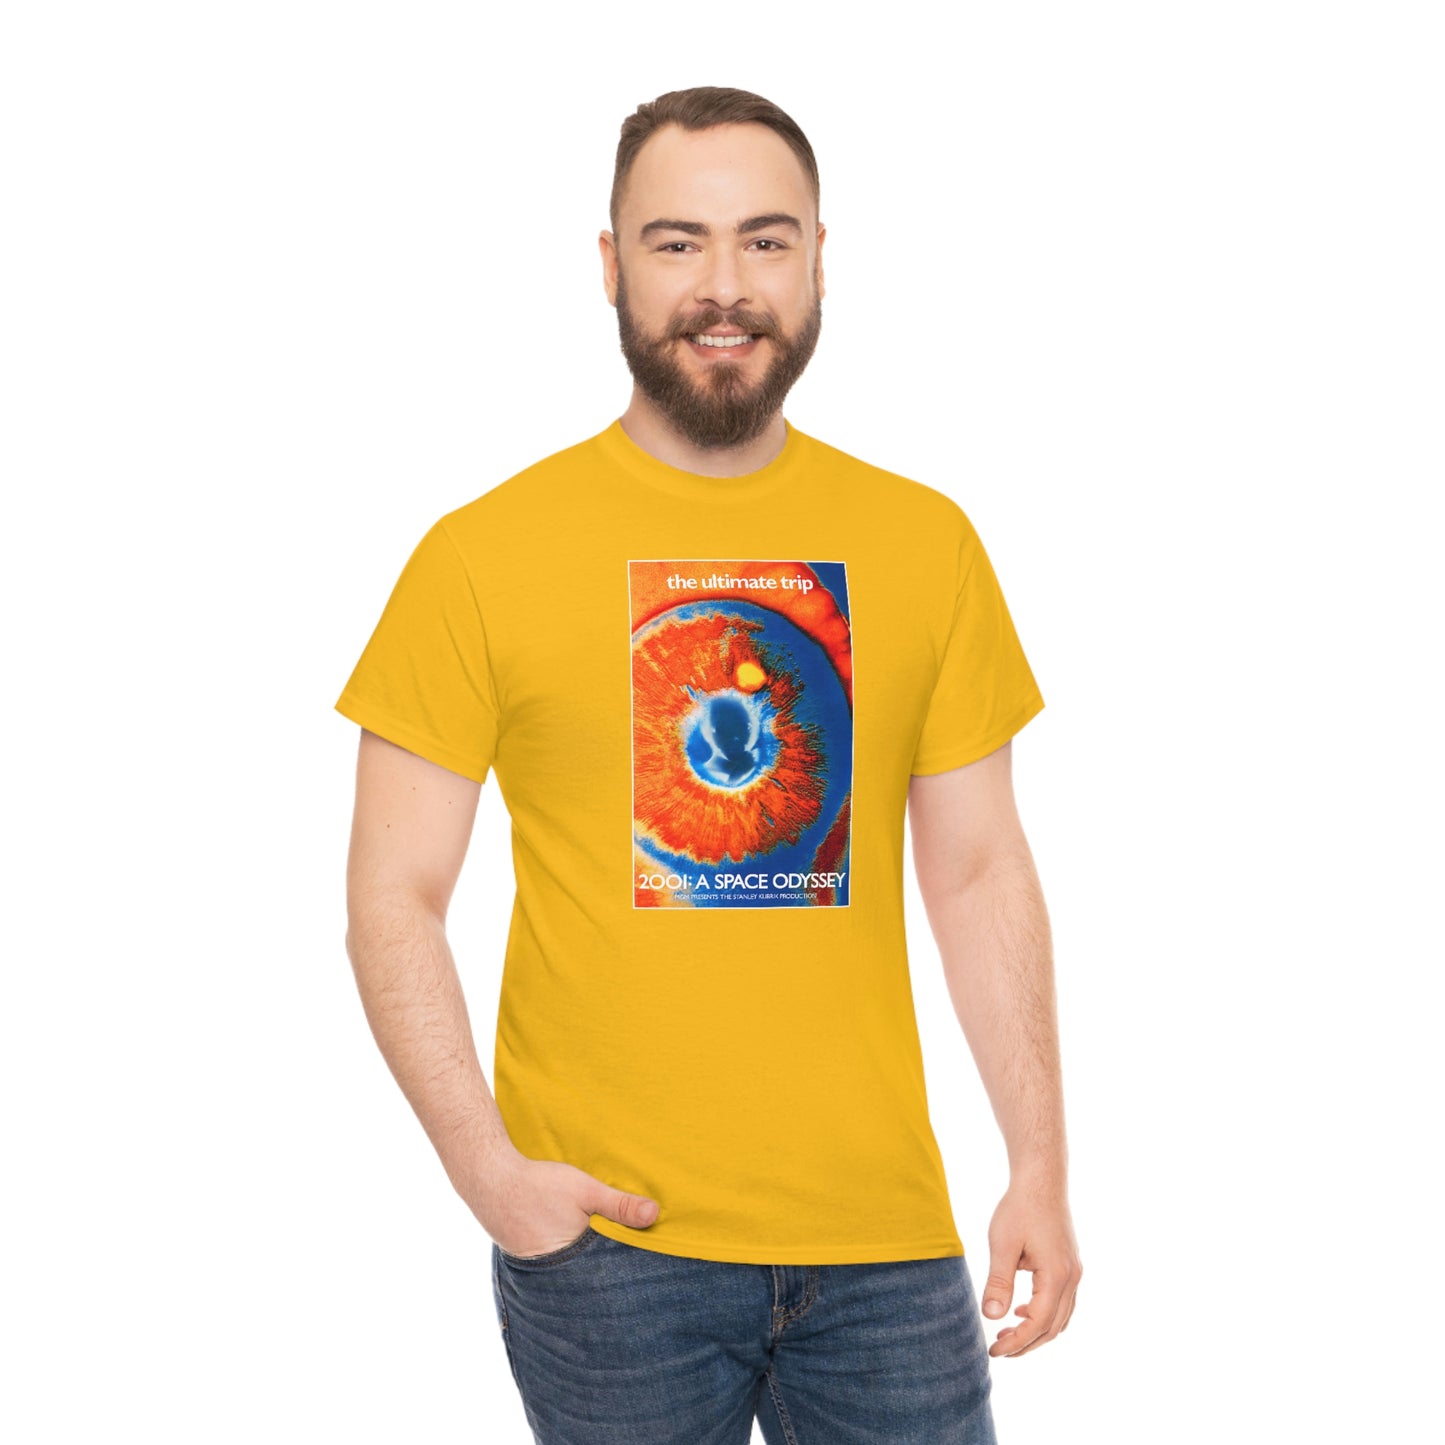 2001 A Space Odyssey T-Shirt